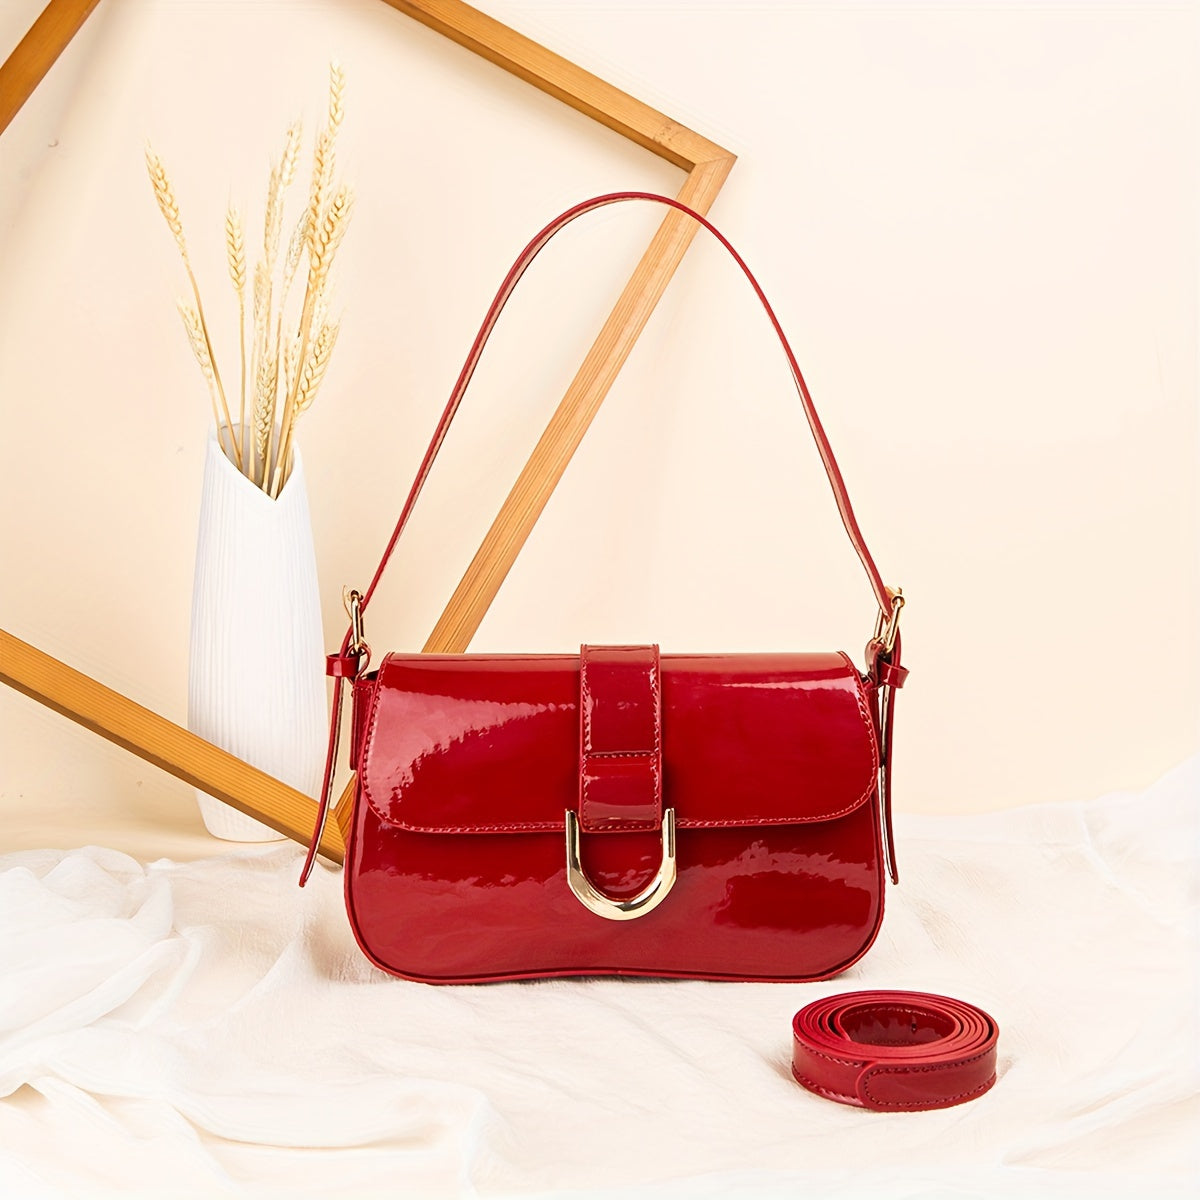 realaiot  Fashion Glossy Crossbody Bag, Patent Leather PU Square Purse, Elegant Red Shoulder Bag For Women